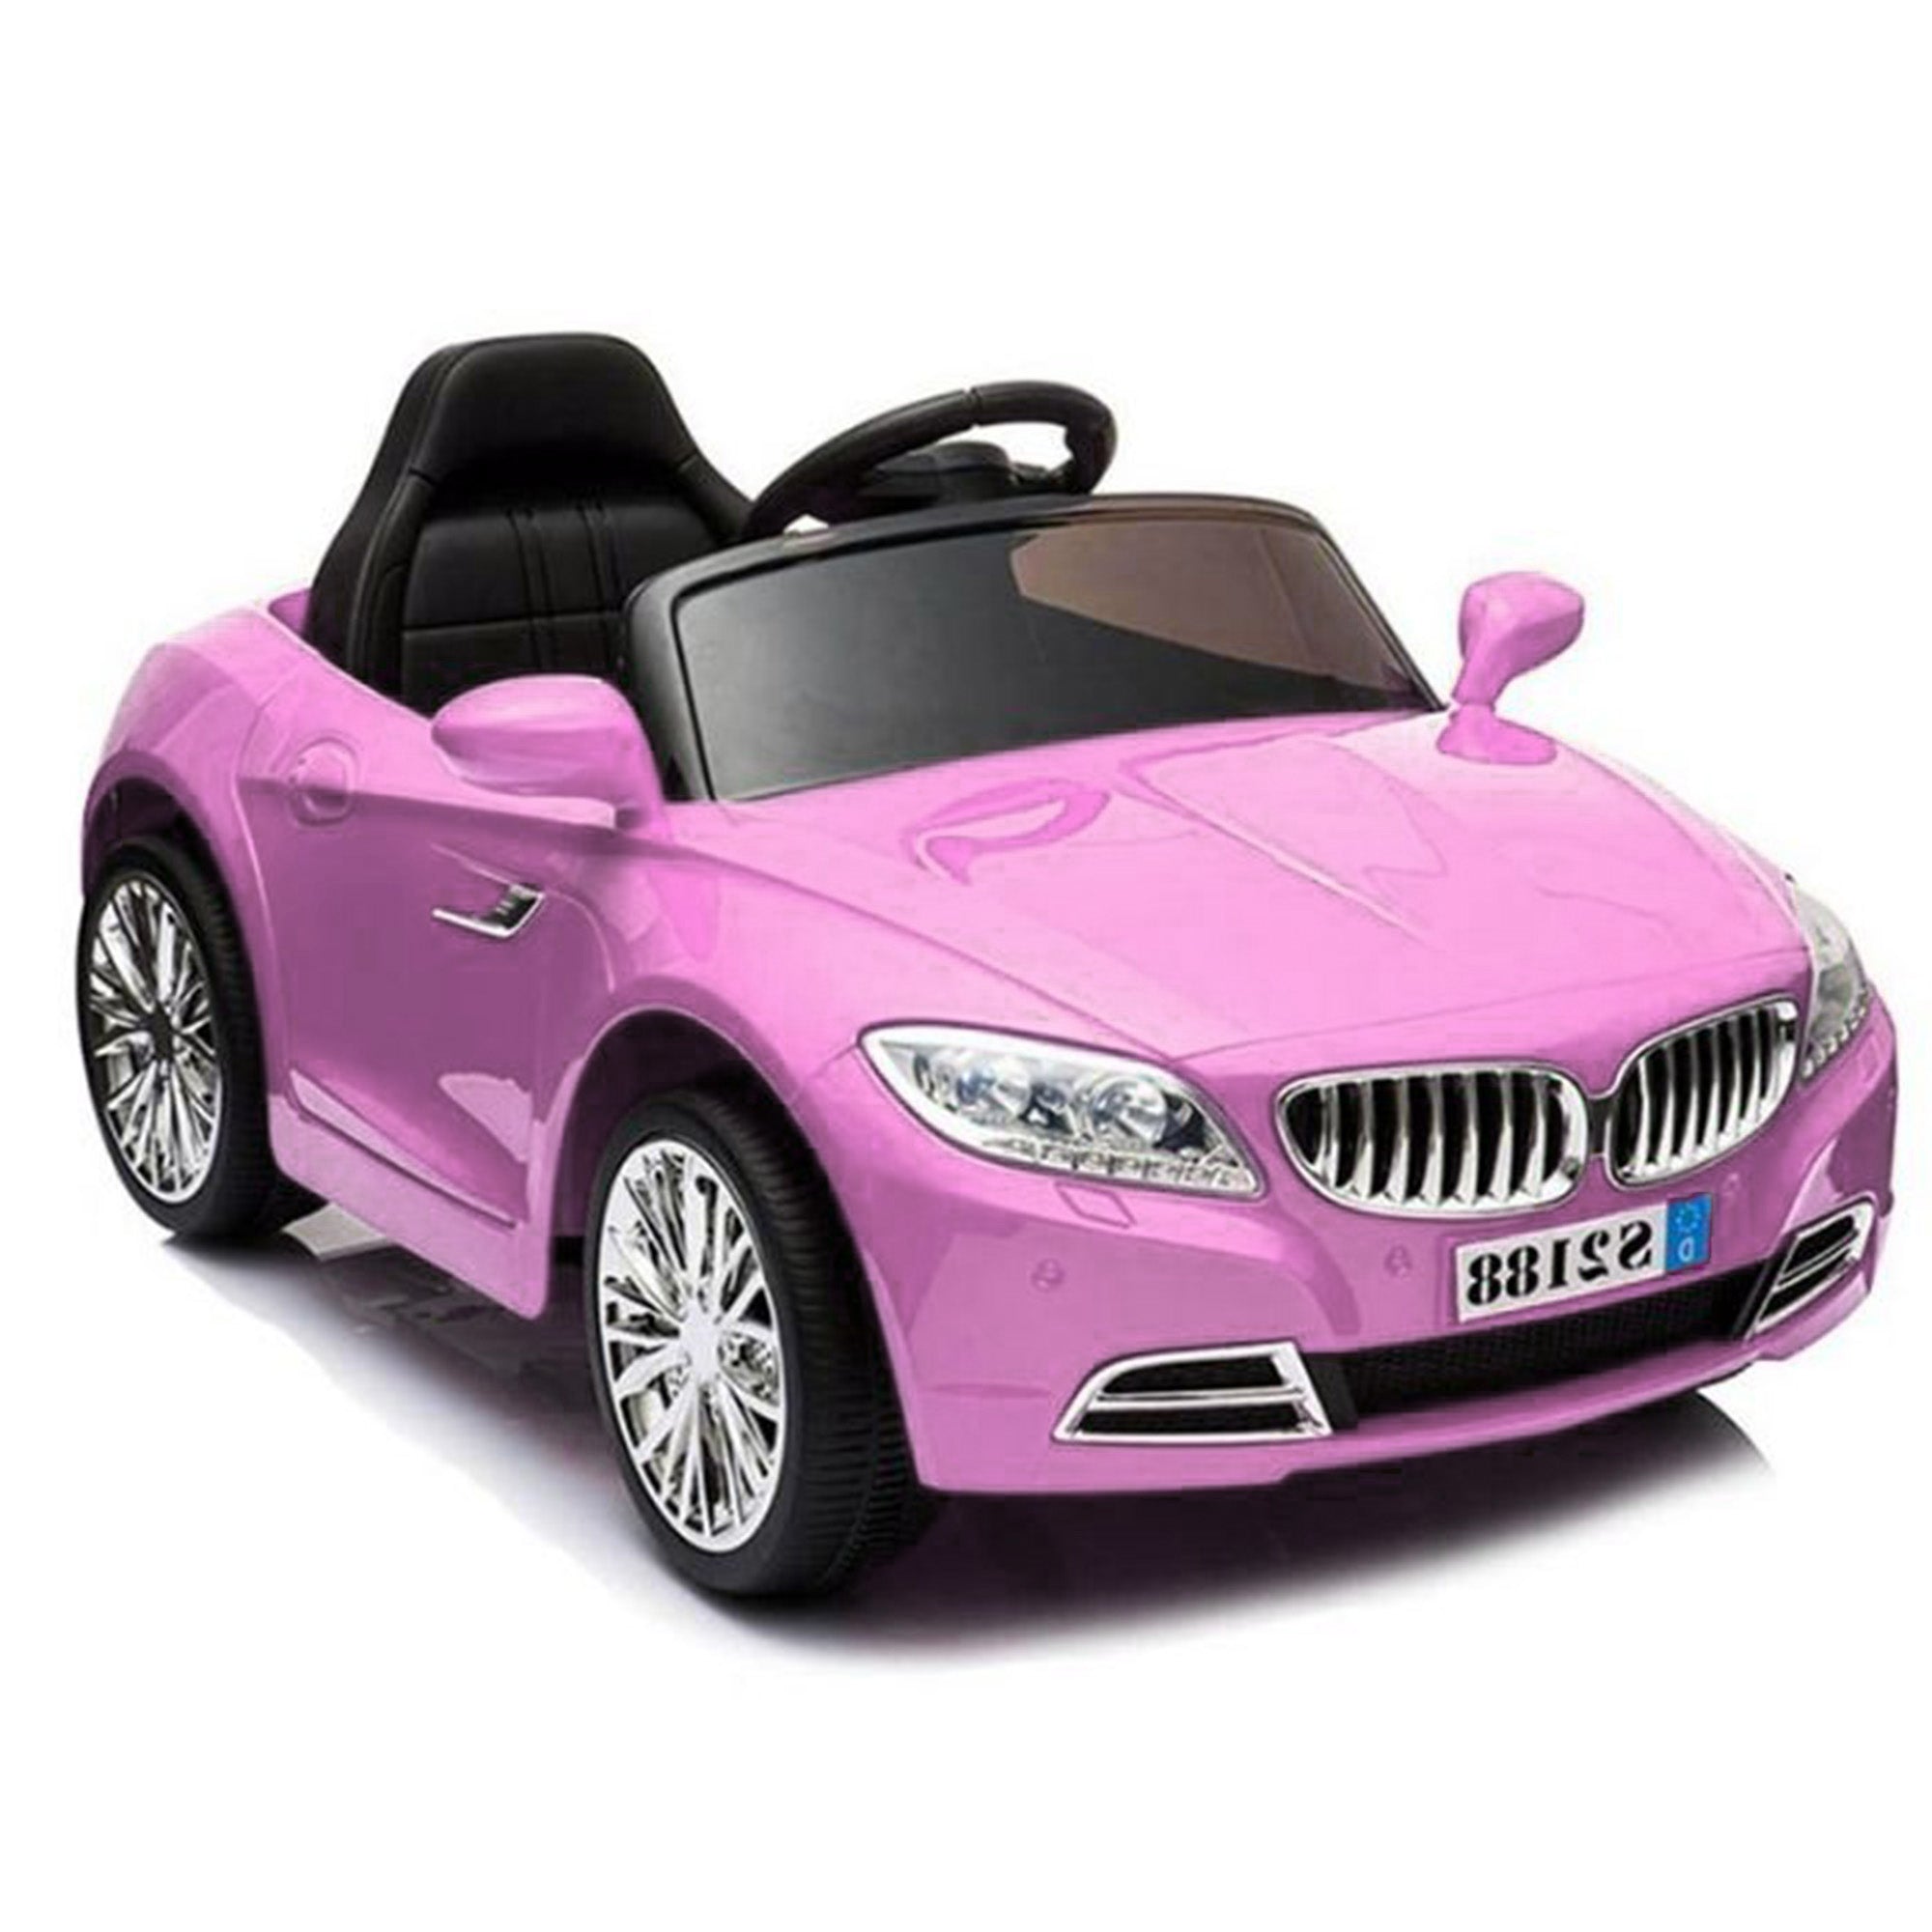 Super Girl Kids Electric Ride on Car with LED Lights Music Parental Remote Control - Pink